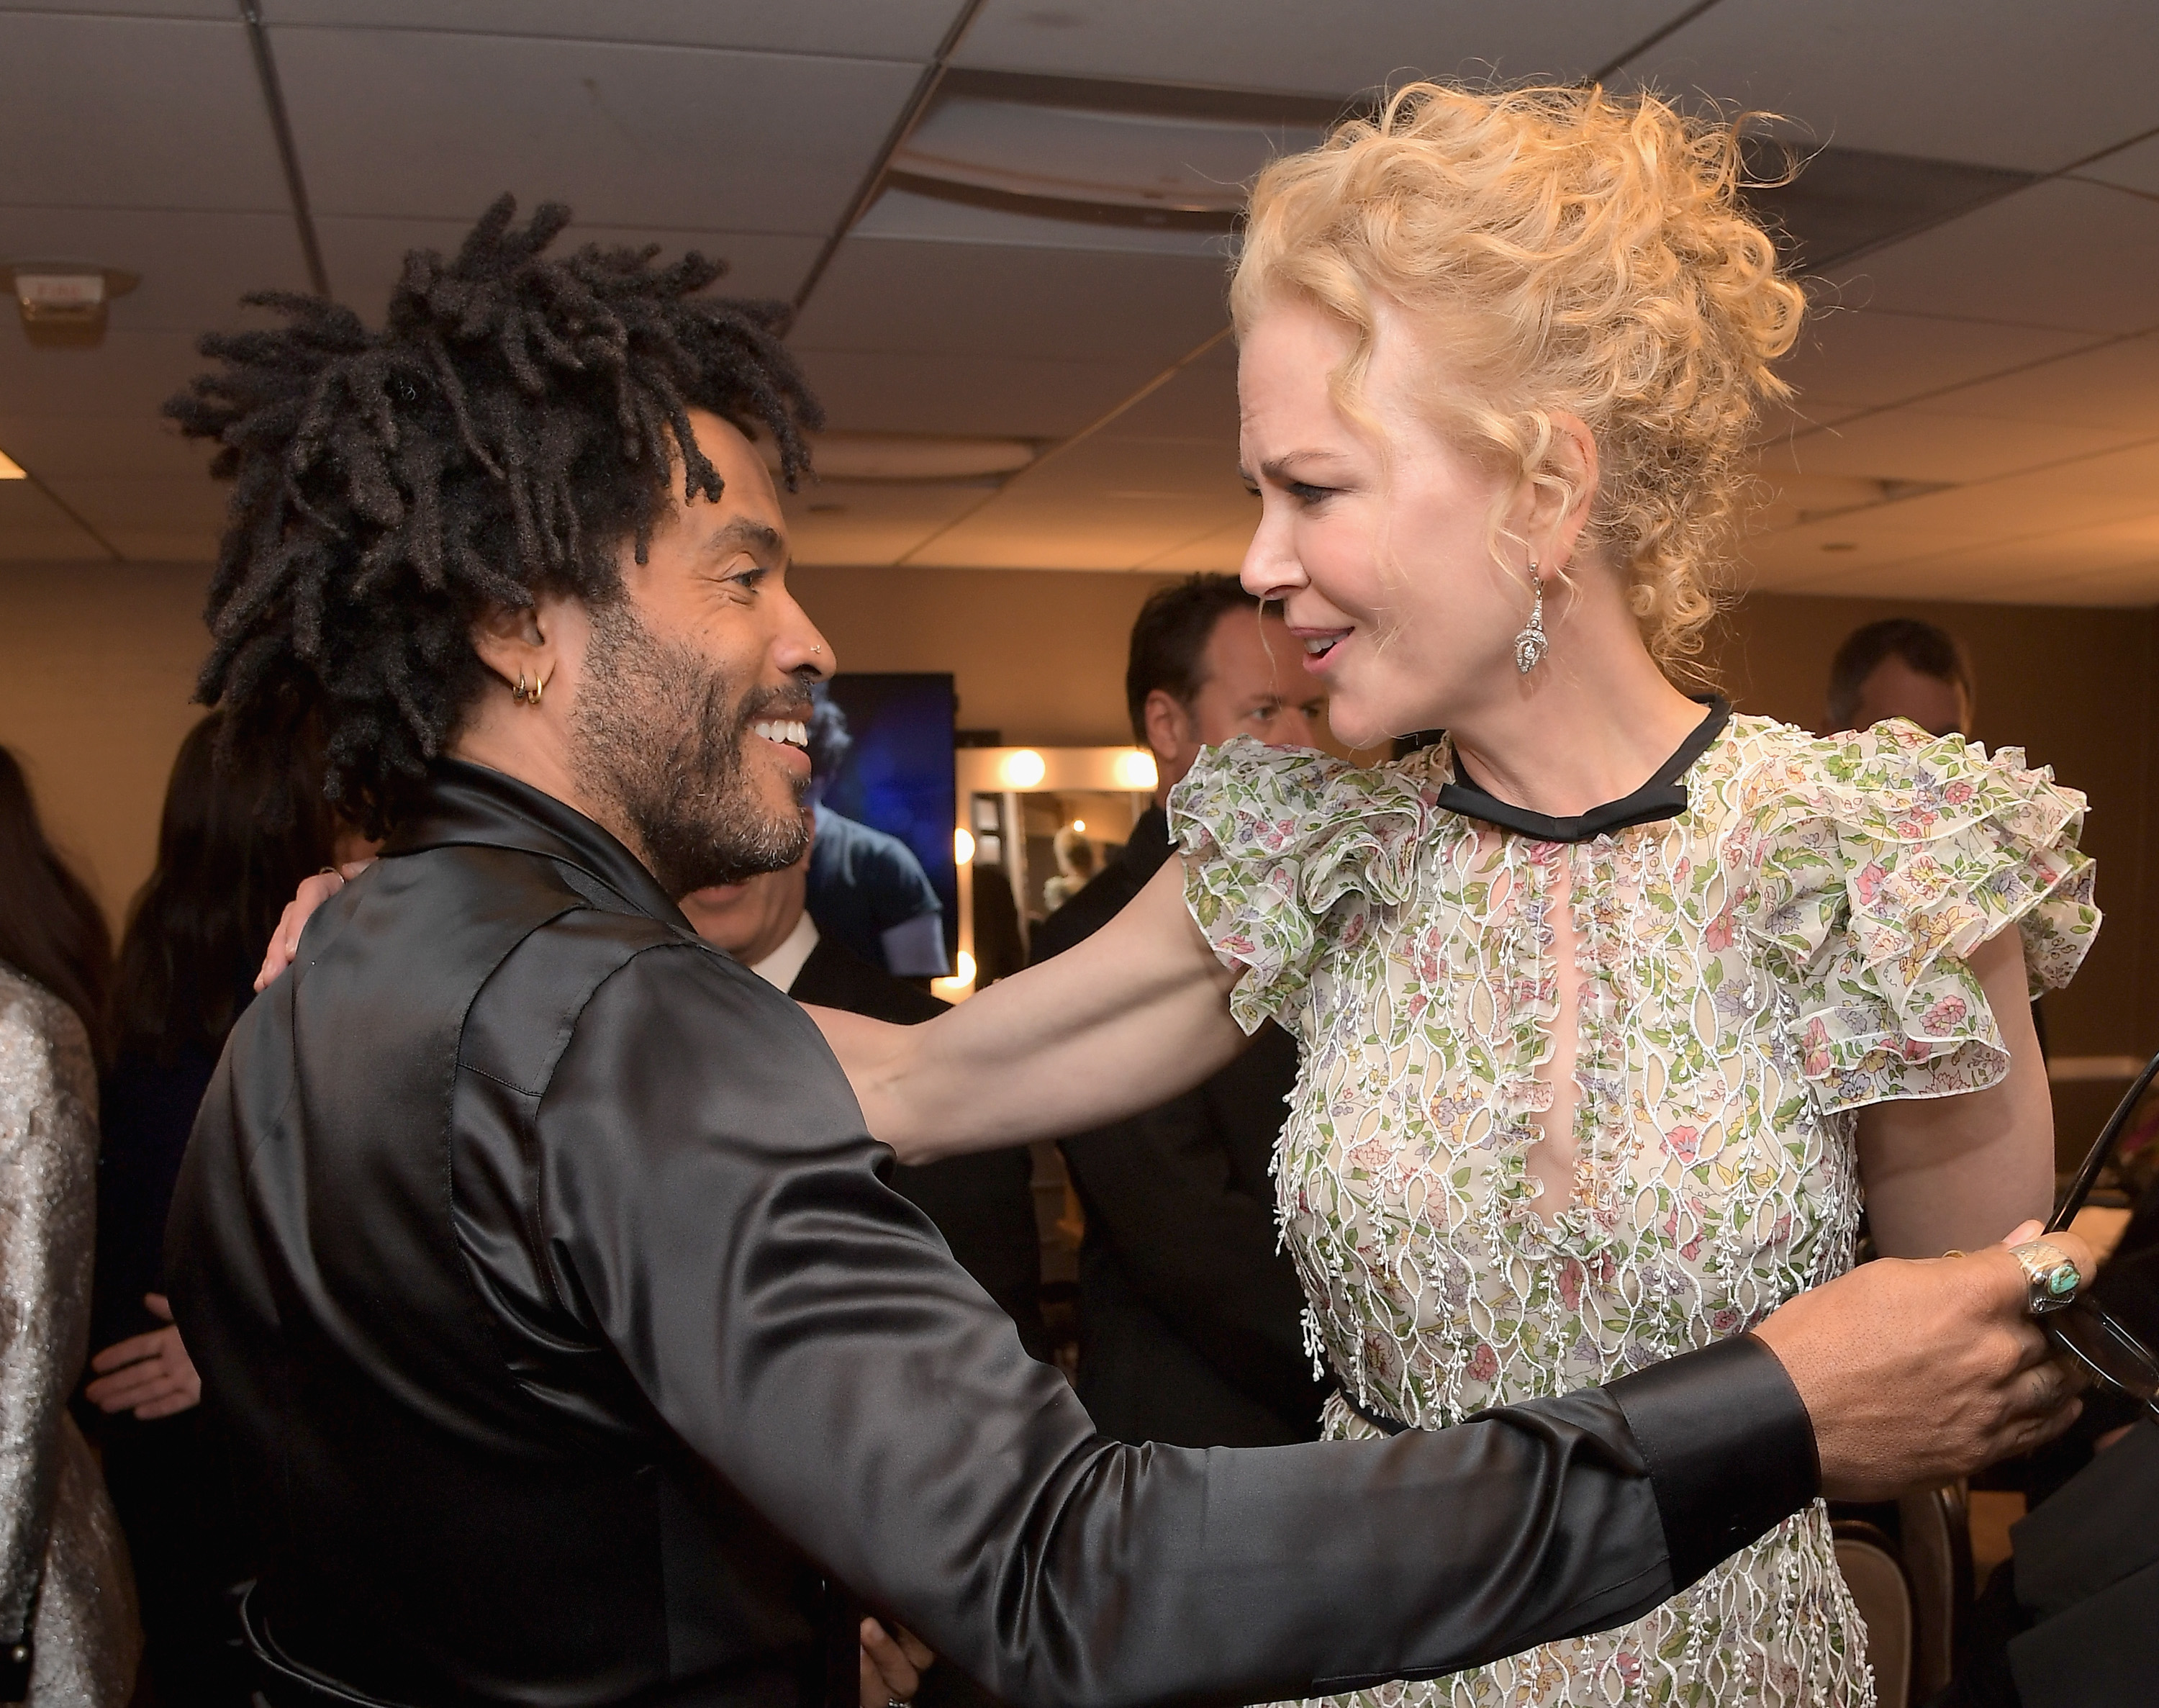 Lenny Kravitz and Nicole Kidman during the Hollywood Film Awards on November 6, 2016 in West Hollywood, California. | Source: Getty Images